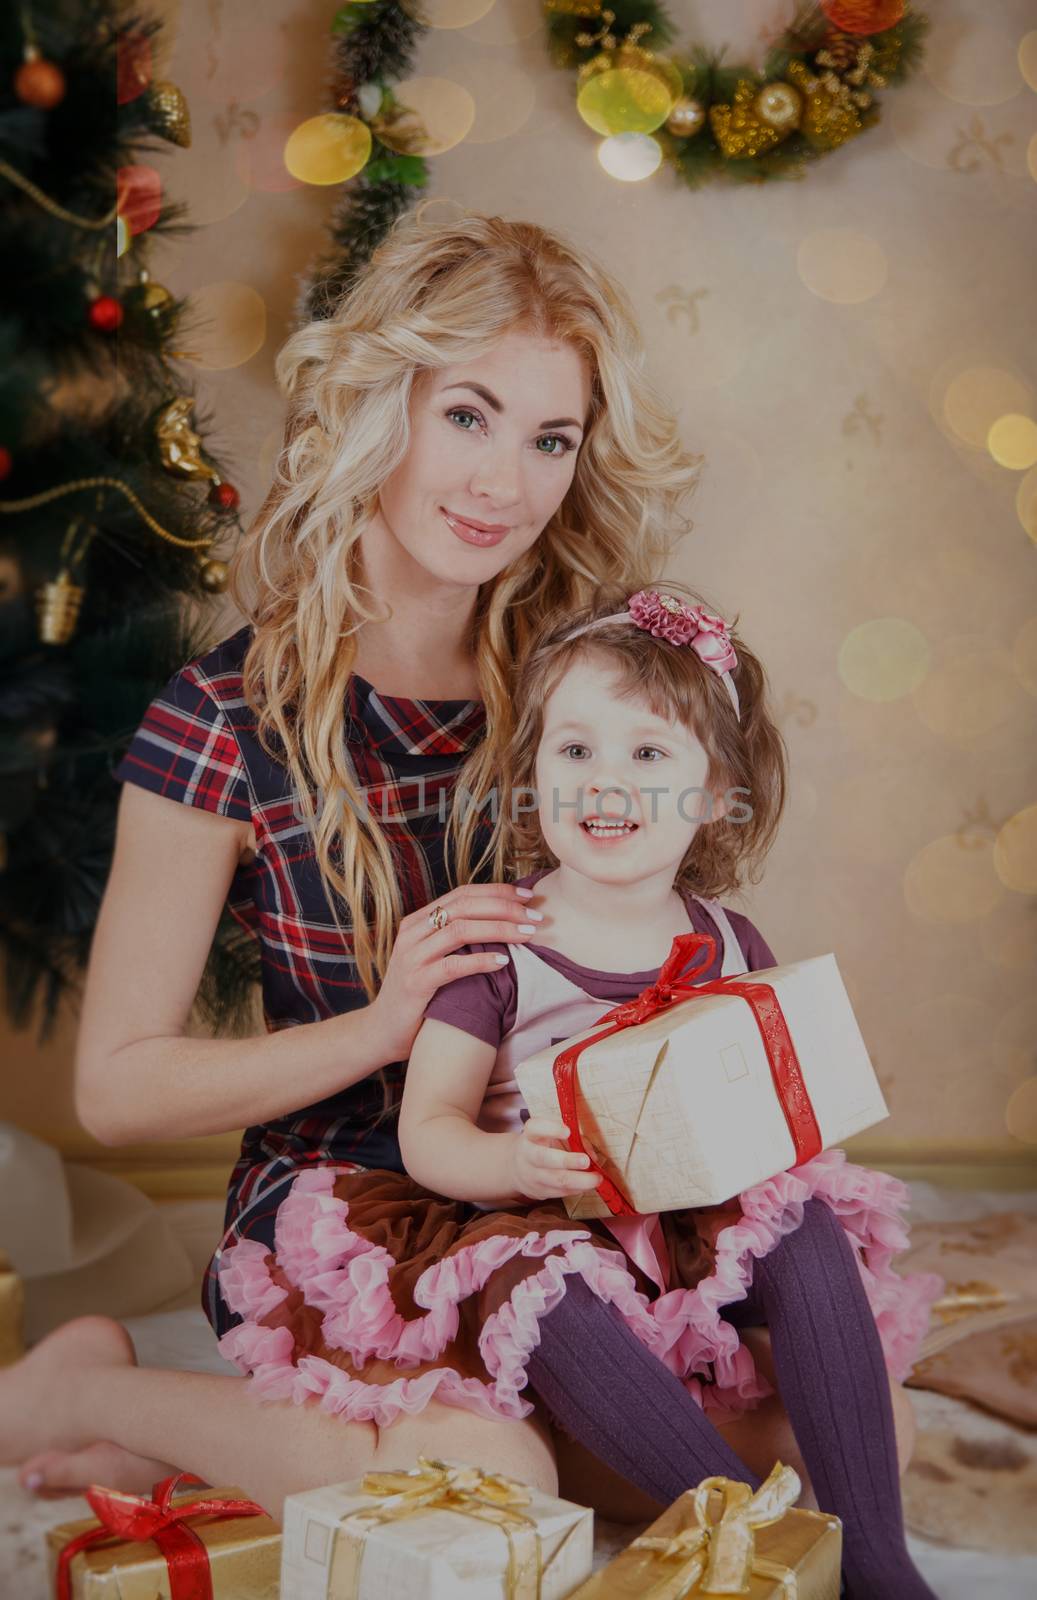 Mother and little daughter with gift-box near Christmas tree